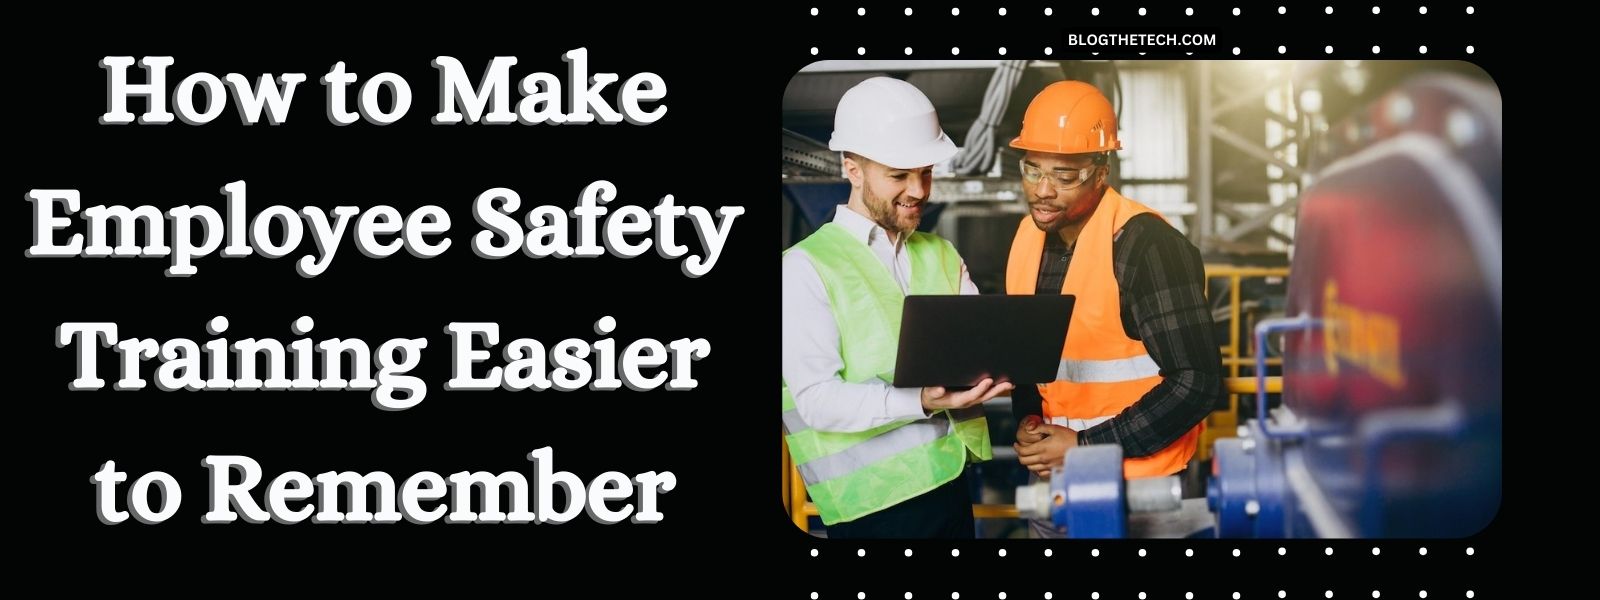 Make Employee Safety Training Easier to Remember